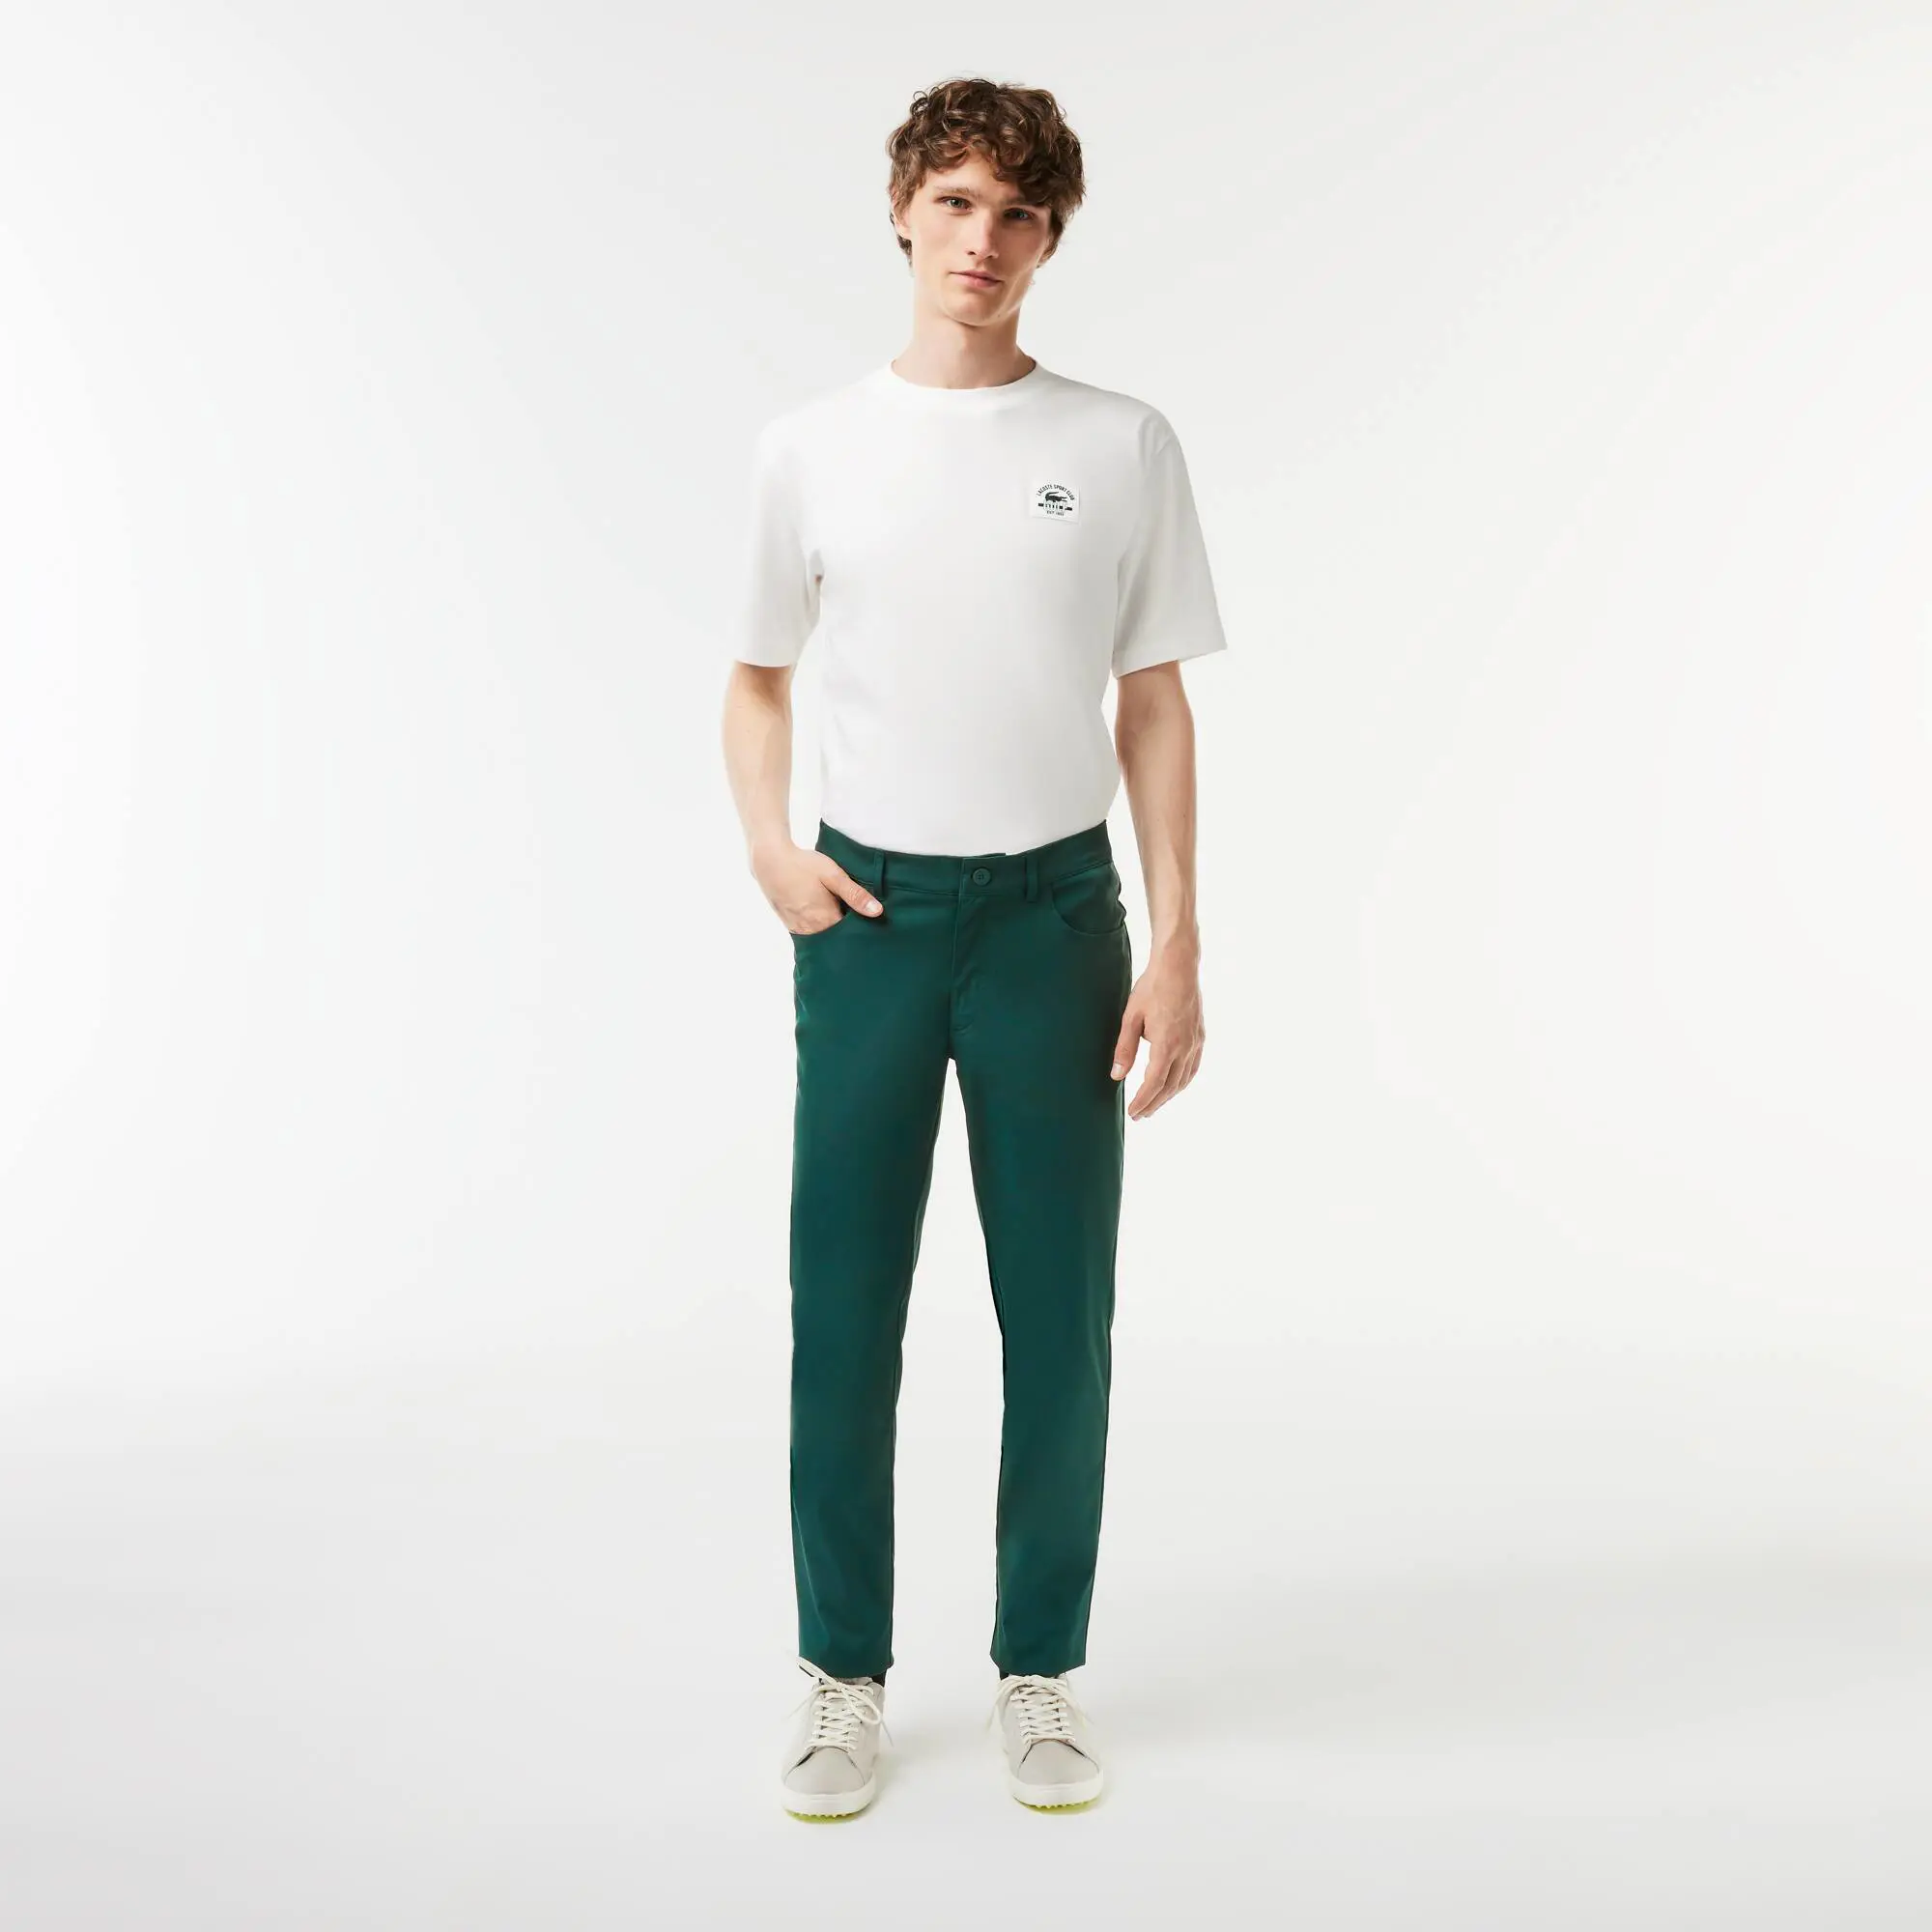 Lacoste Golf trousers with grip band. 1